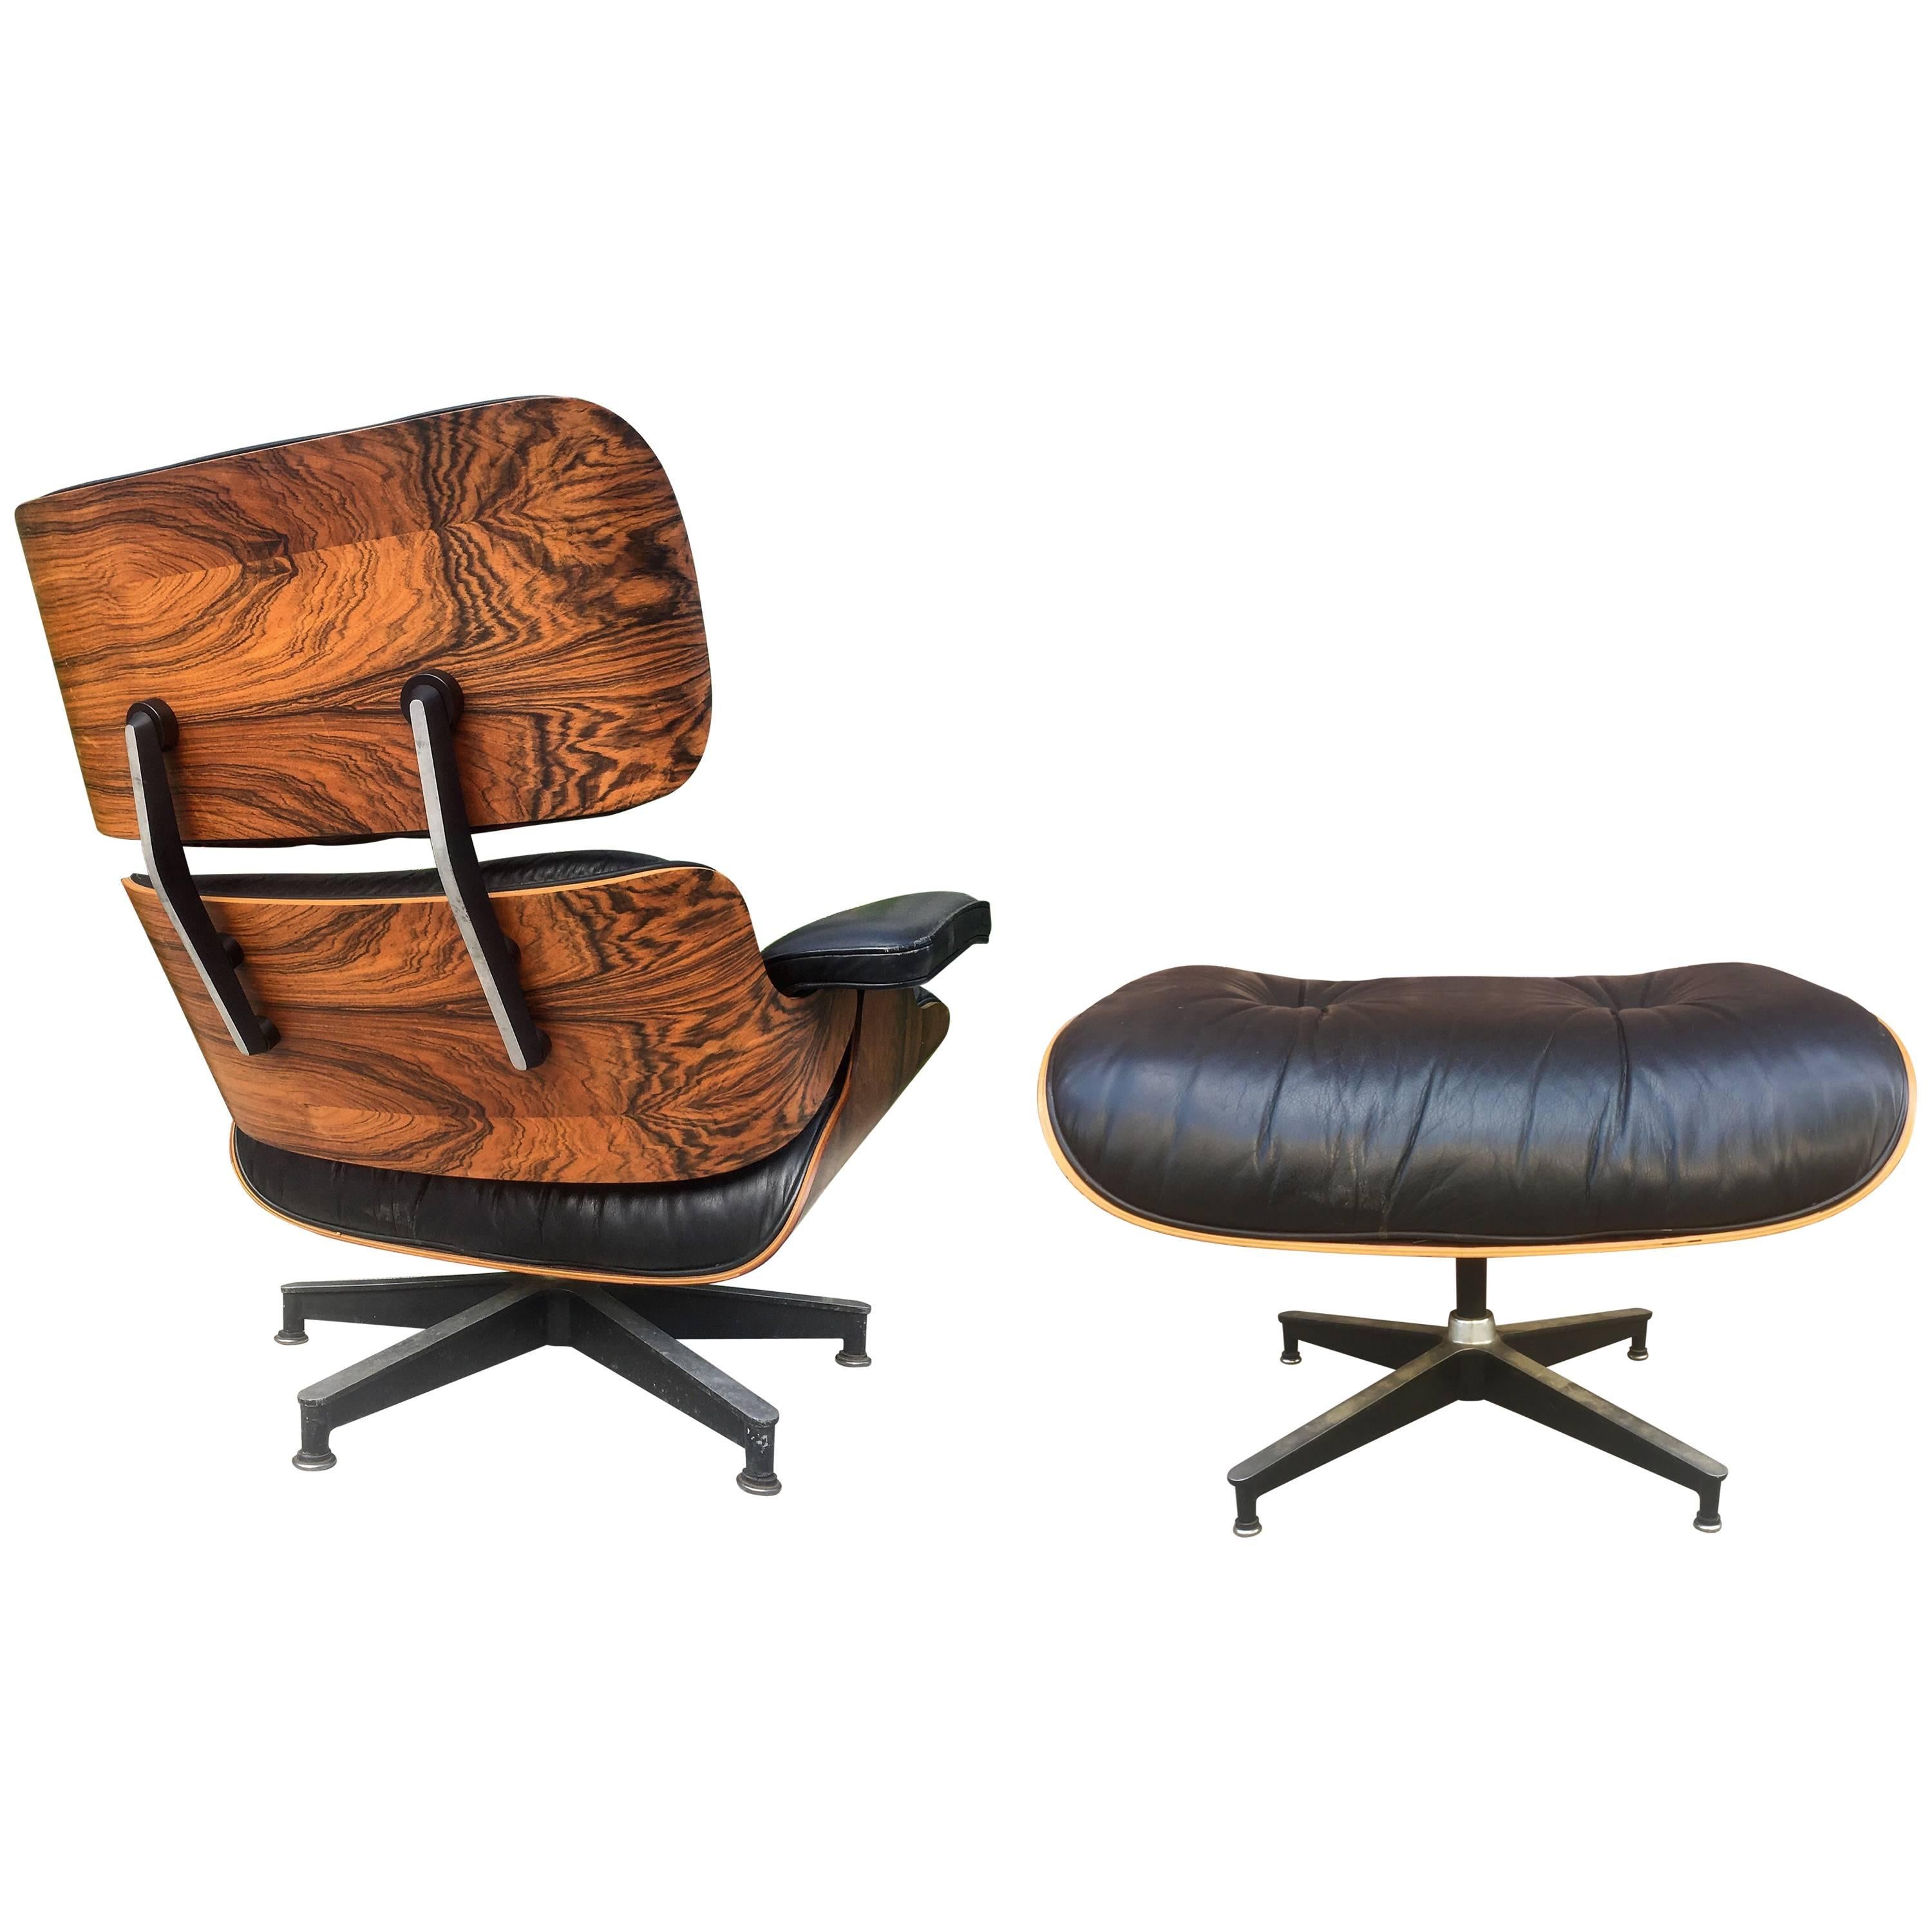 Spectacular Herman Miller Eames Lounge Chair and Ottoman